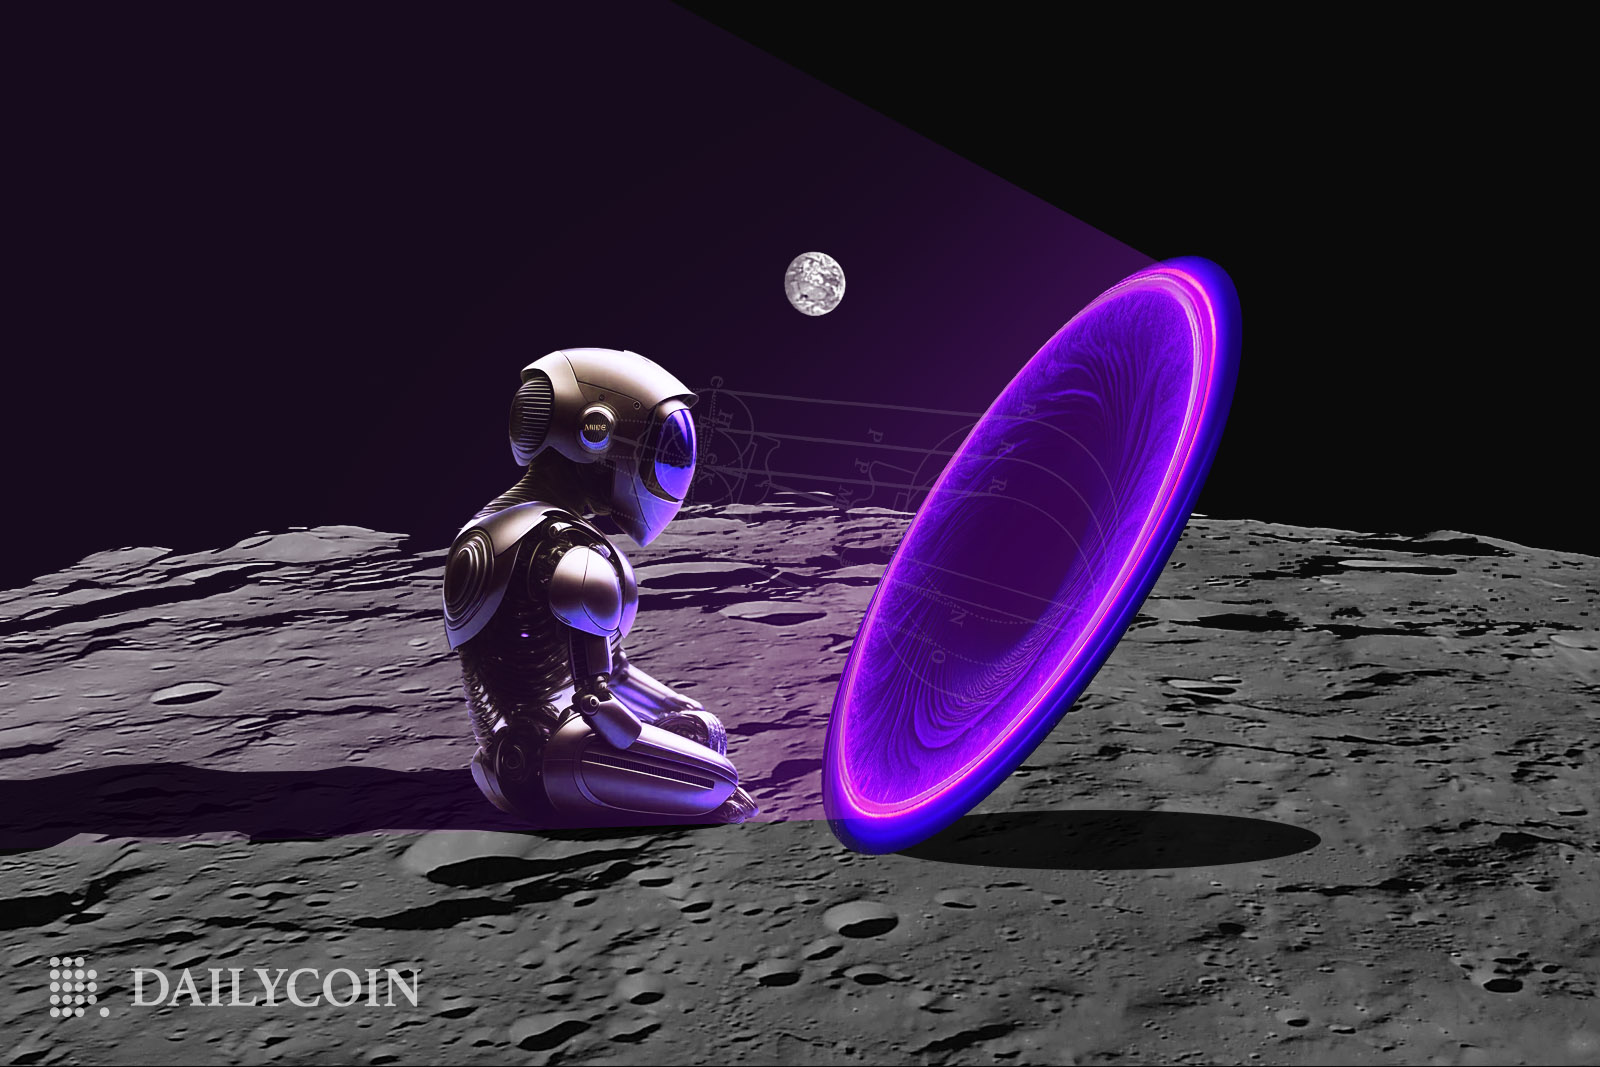 defi prediction market visual shows alien astronaut robot sitting on the moon surface looking at the violet portal